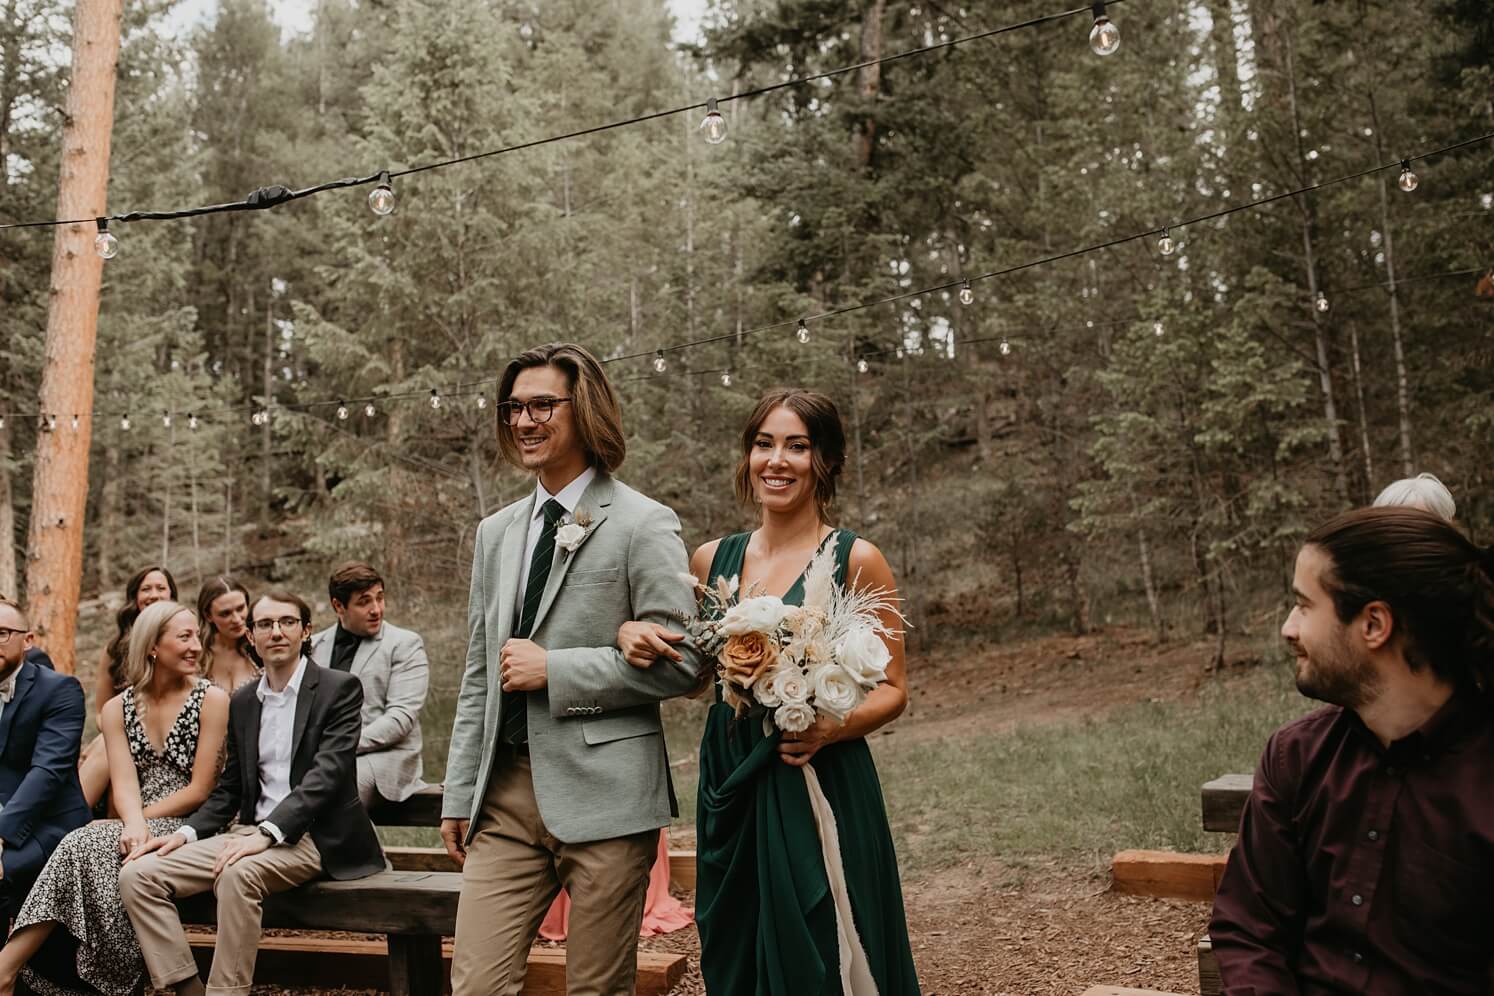 Wedding floral design: groomsman and bridesmaid carrying boho bouquet walking down the aisle | McArthur Weddings and Events